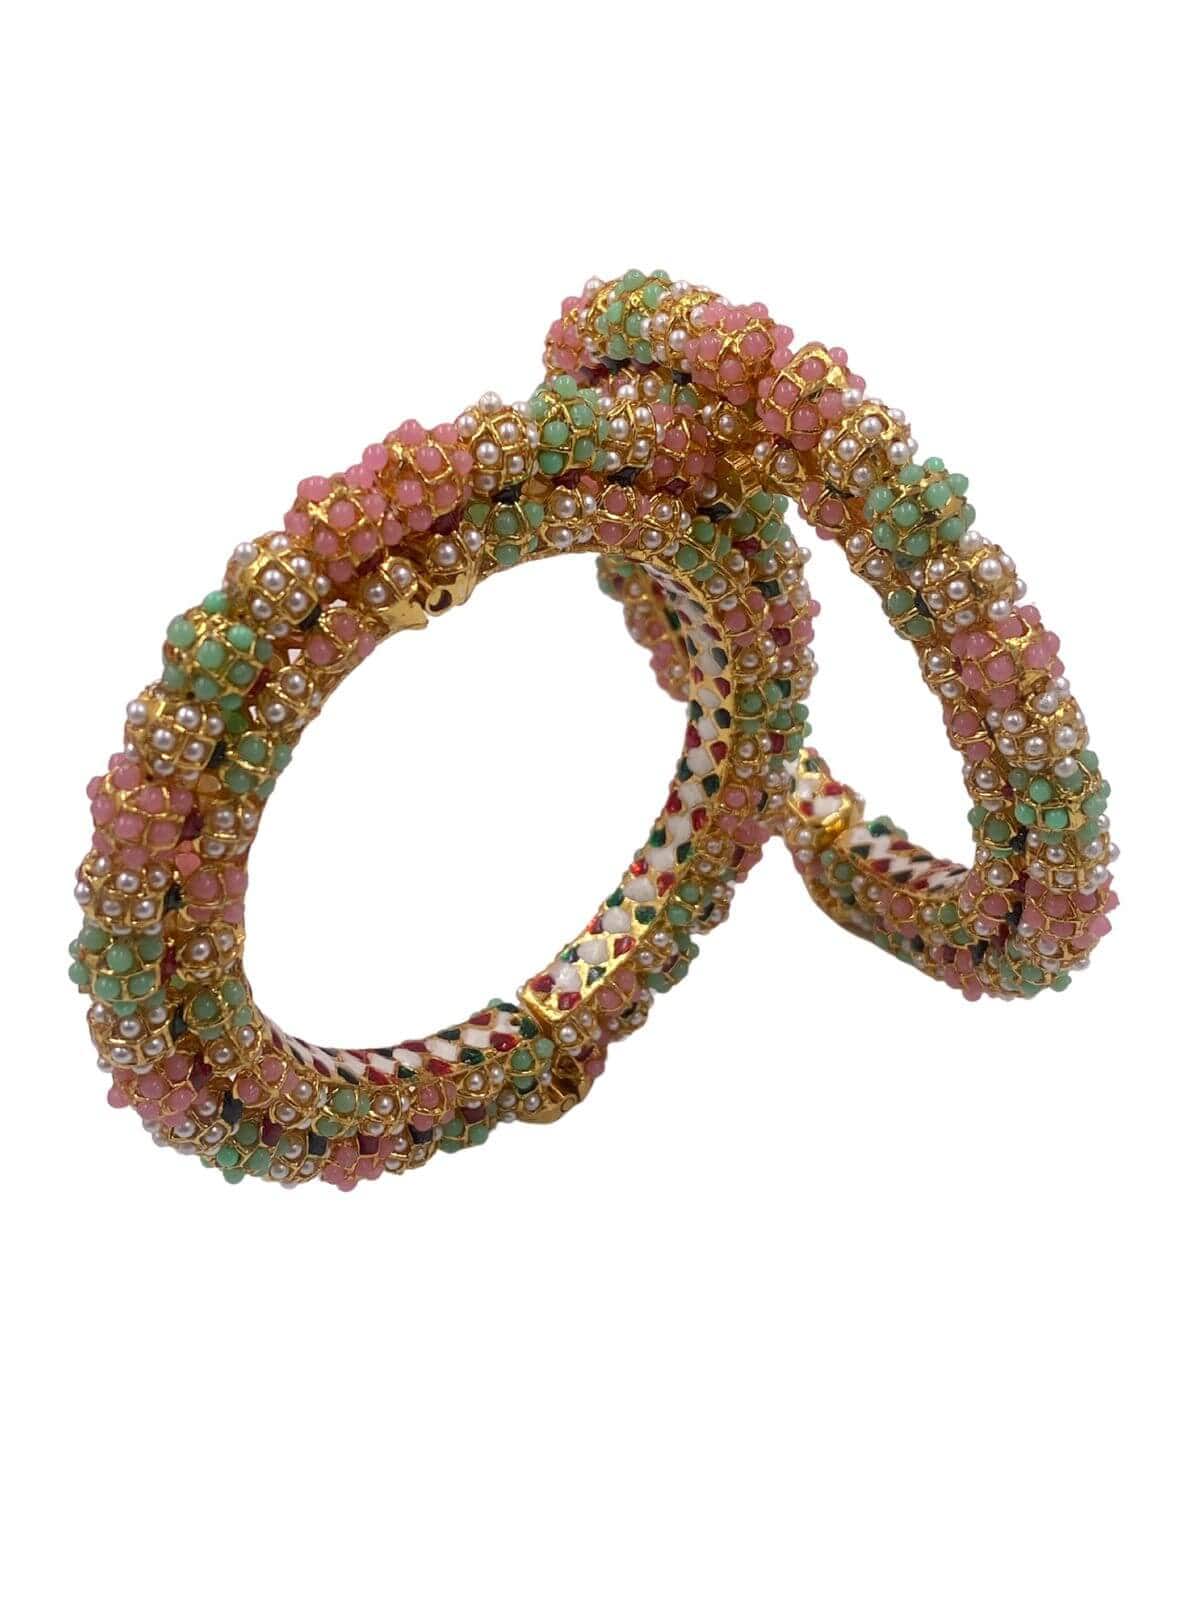 Soft Pink, Pink, and Neon Green Camouflage Paracord Bracelet That Will Help  People Who Need It The Most